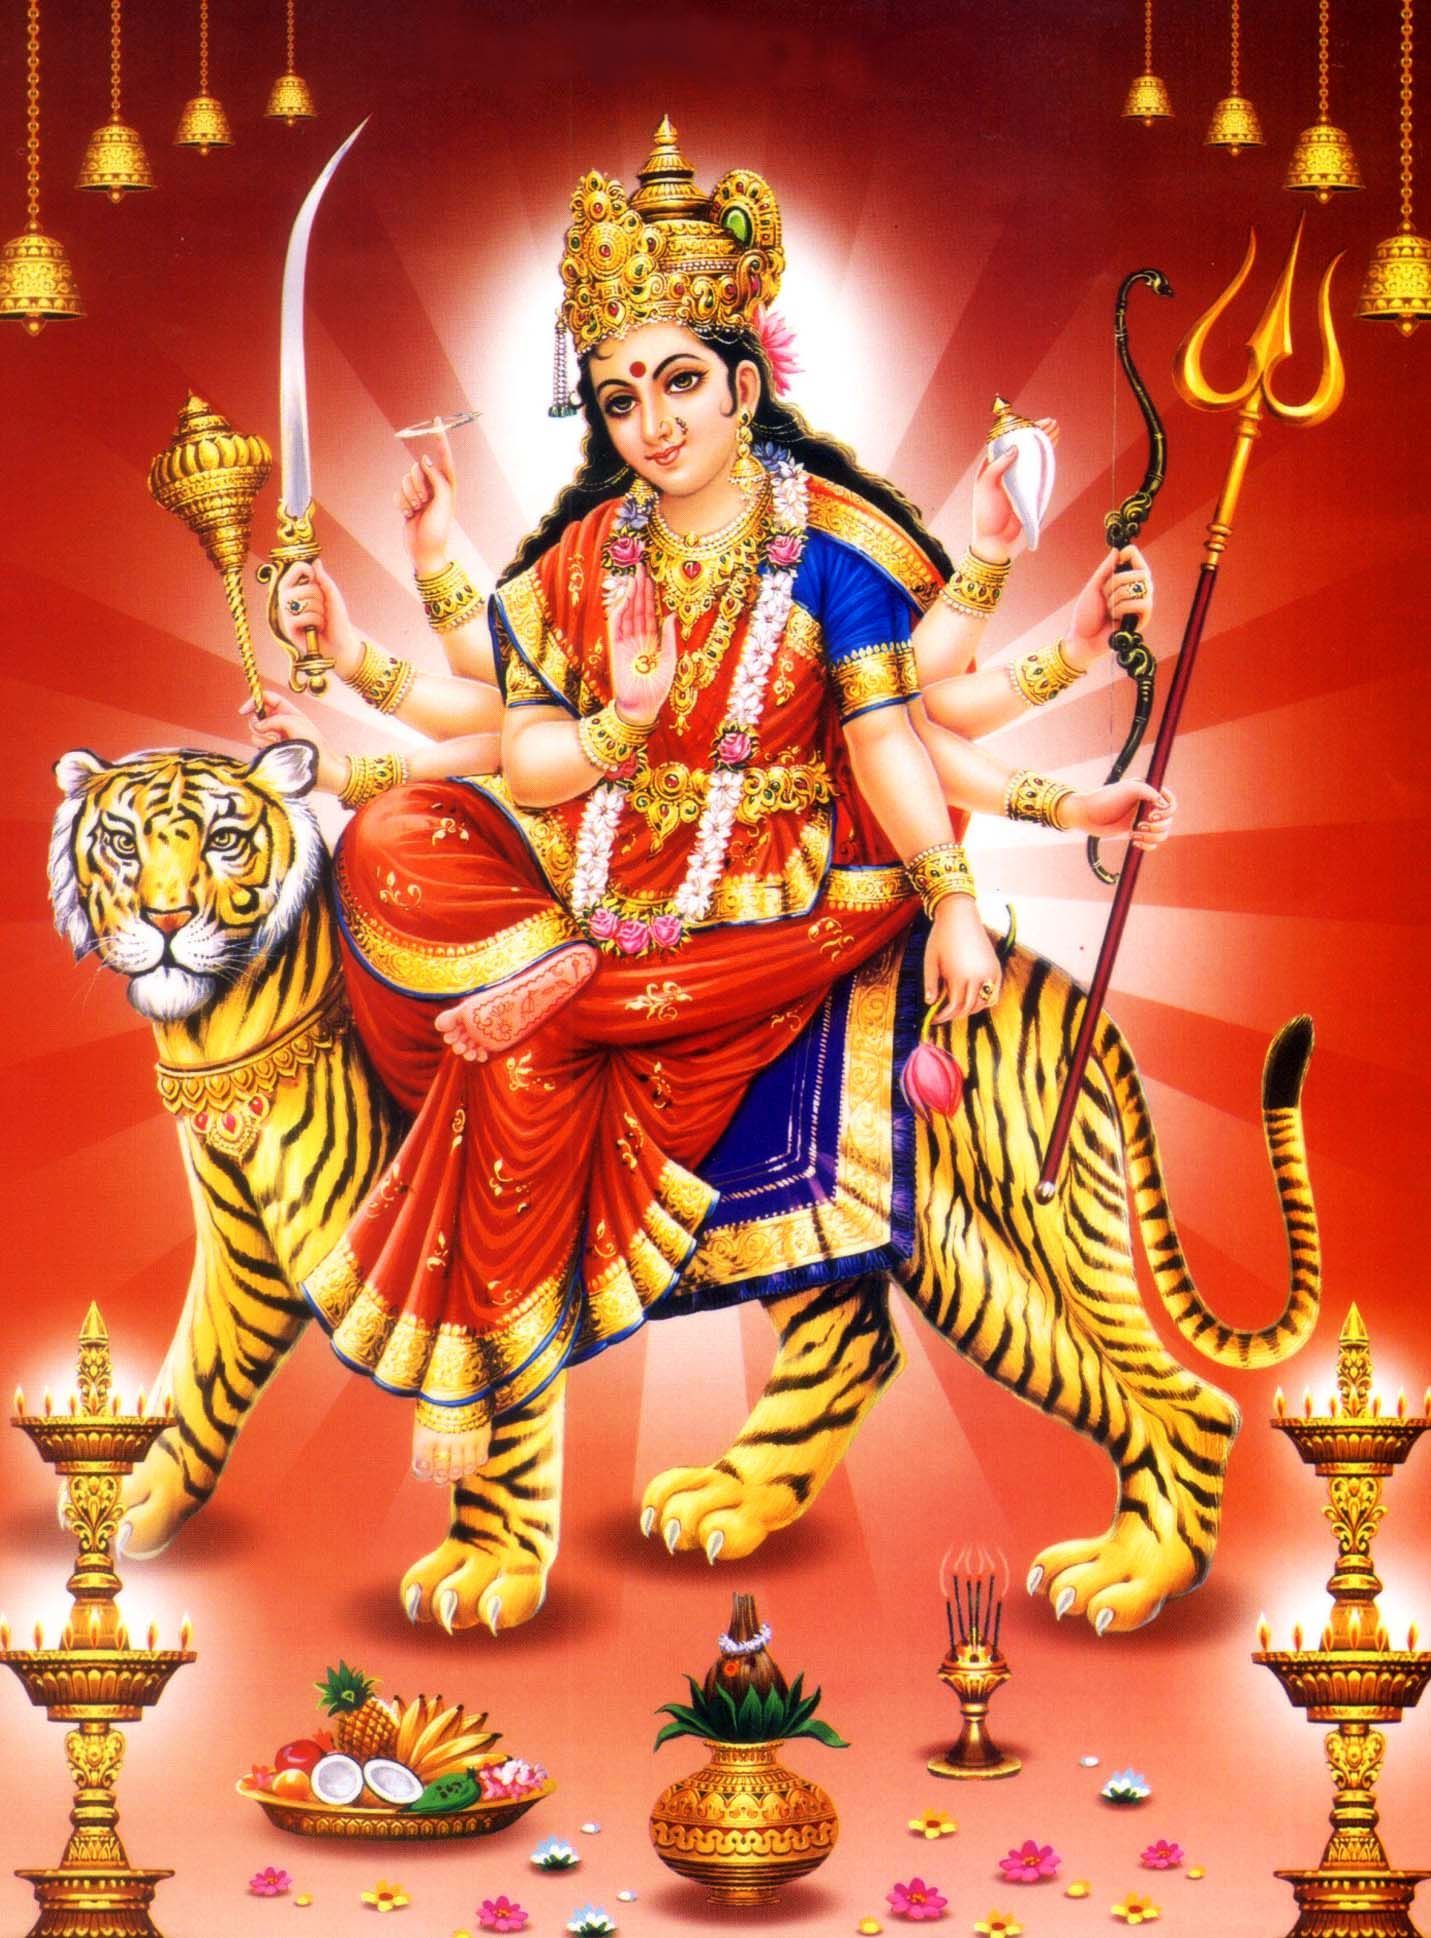 weddingposters.in -&nbspThis website is! -&nbspcloud server monitoring Resources and Information. Durga maa, Happy navratri, Durga goddess